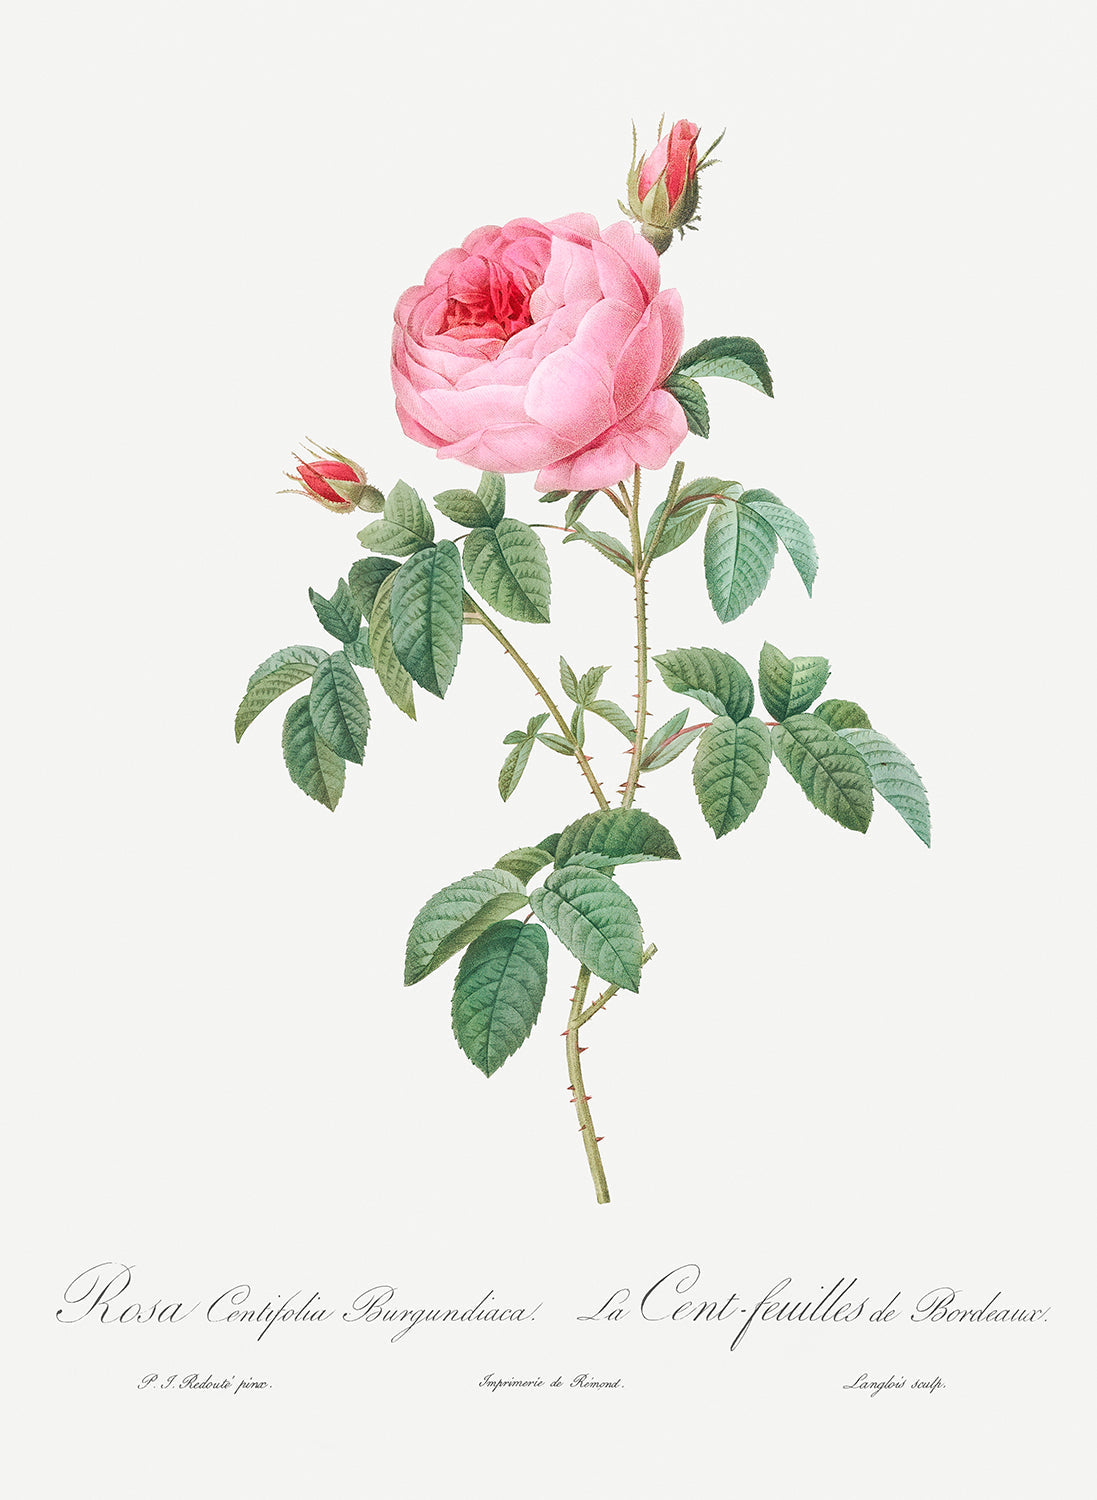 Botanical Plant Print - Burgundy Cabbage Rose by Pierre Joseph Redoute